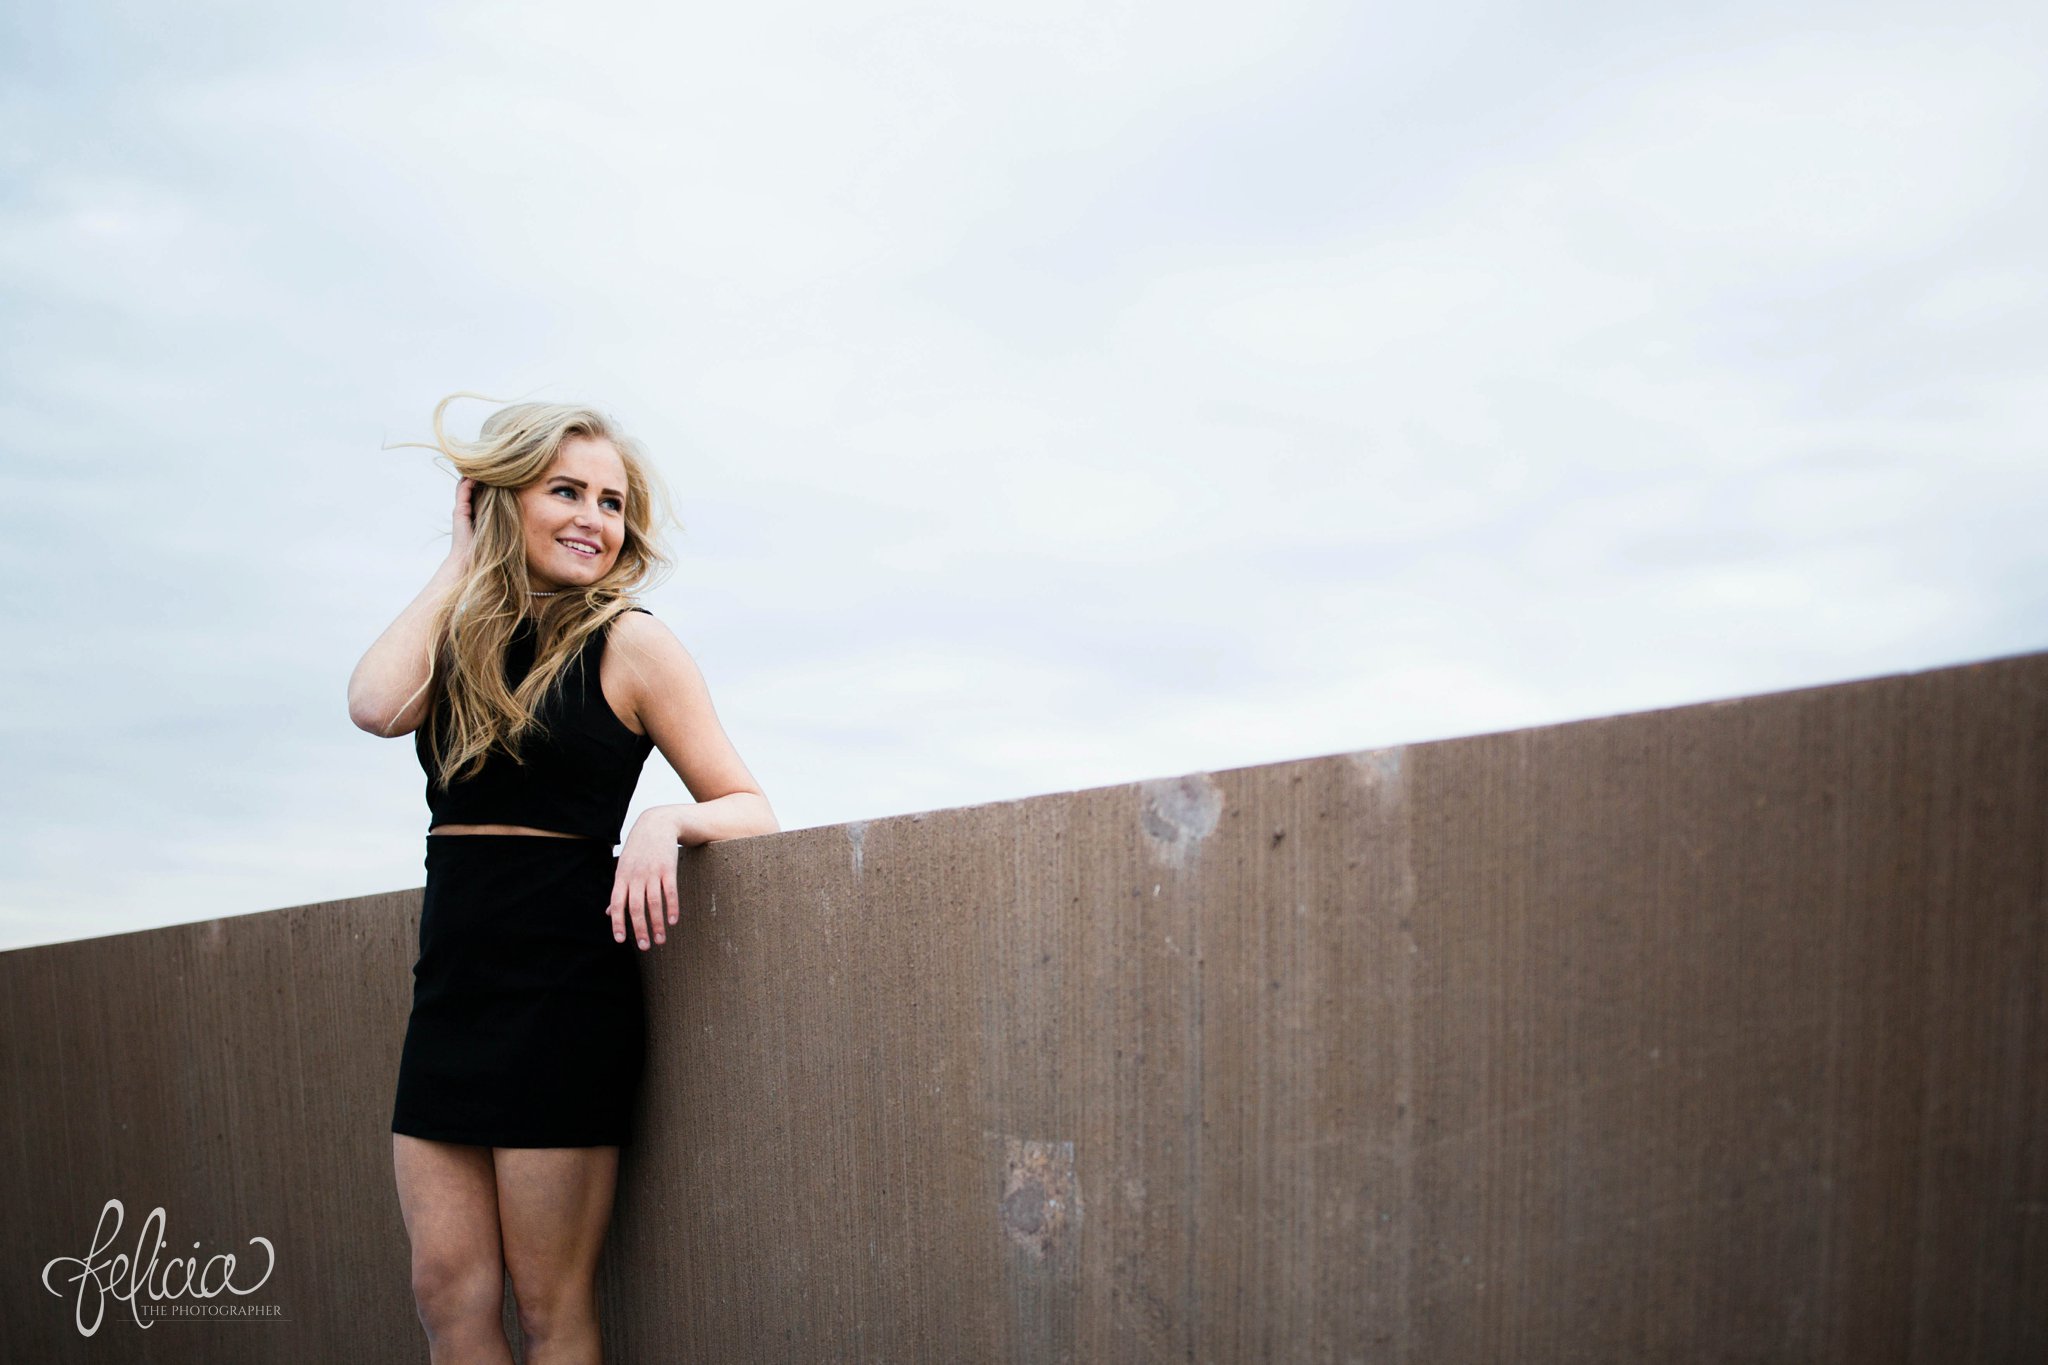 senior photos | senior photography | Lenexa | Kansas | images by feliciathephotographer.com | chic | dancer  | long blonde hair | hair flip | pearl jewelry | pearl necklace | pearl earrings | black outfit | dramatic pose | smiling | hand in hair | full body | leaning against wall  